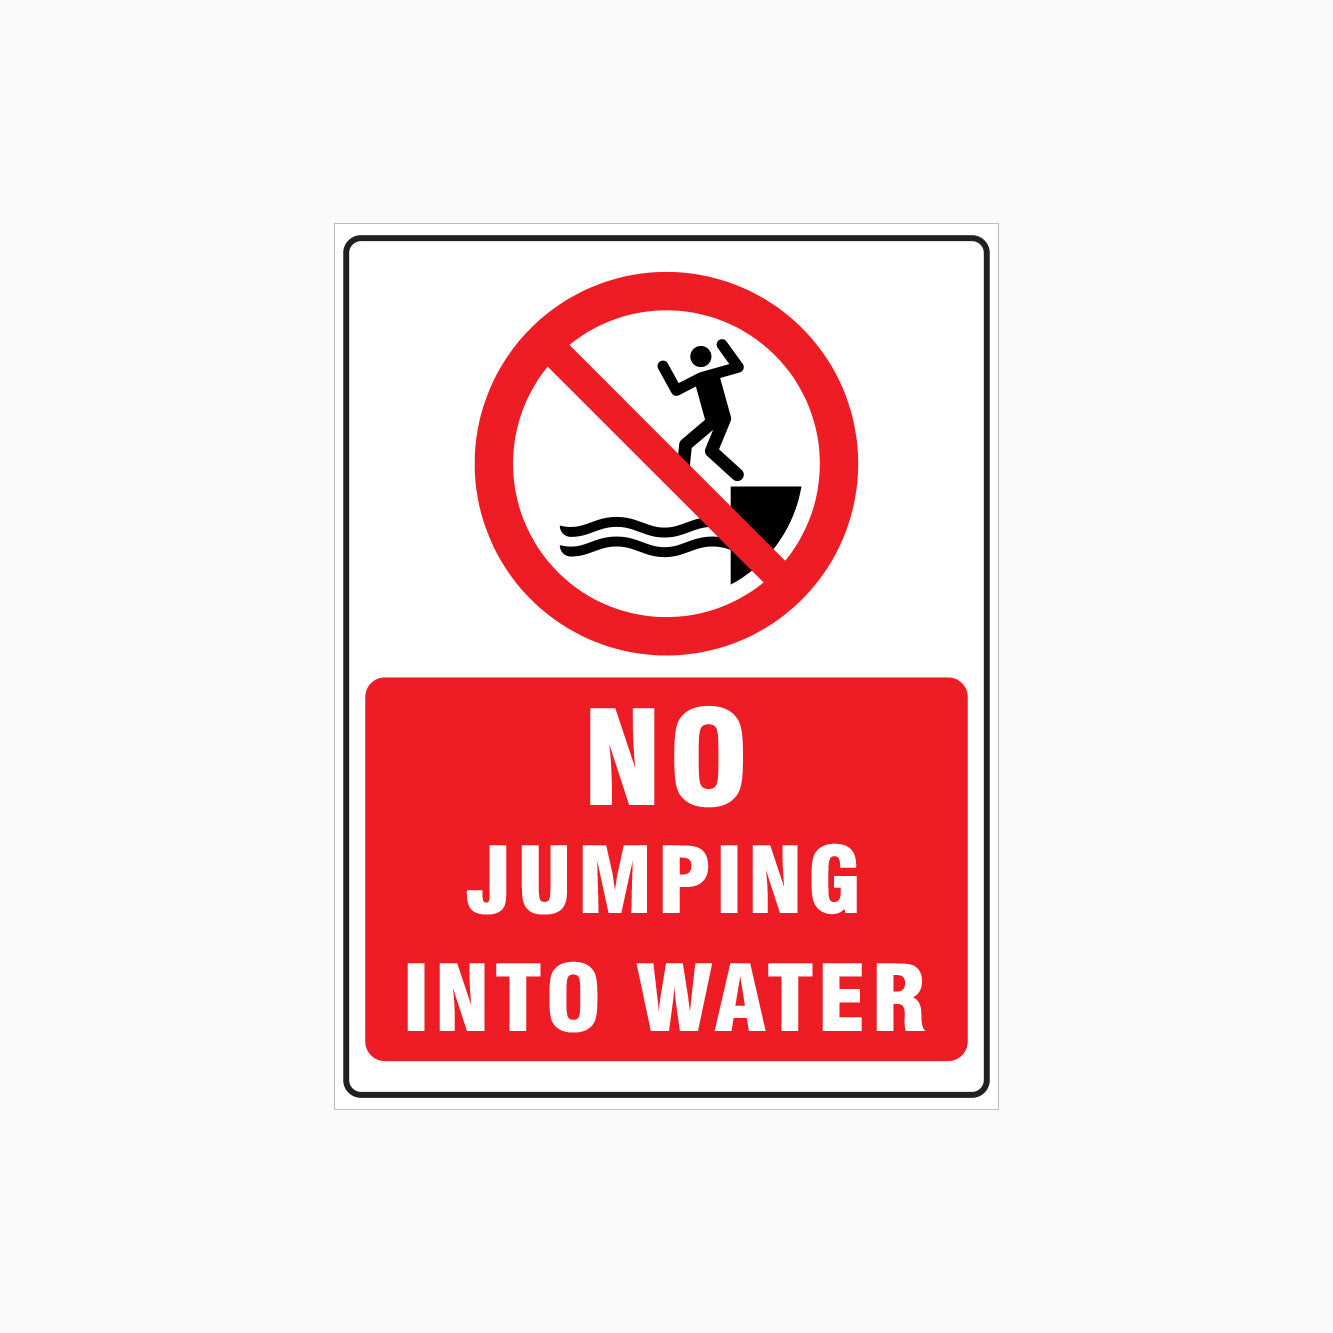 NO JUMPING INTO WATER SIGN - Prohibition Sign - Water Safety Signs